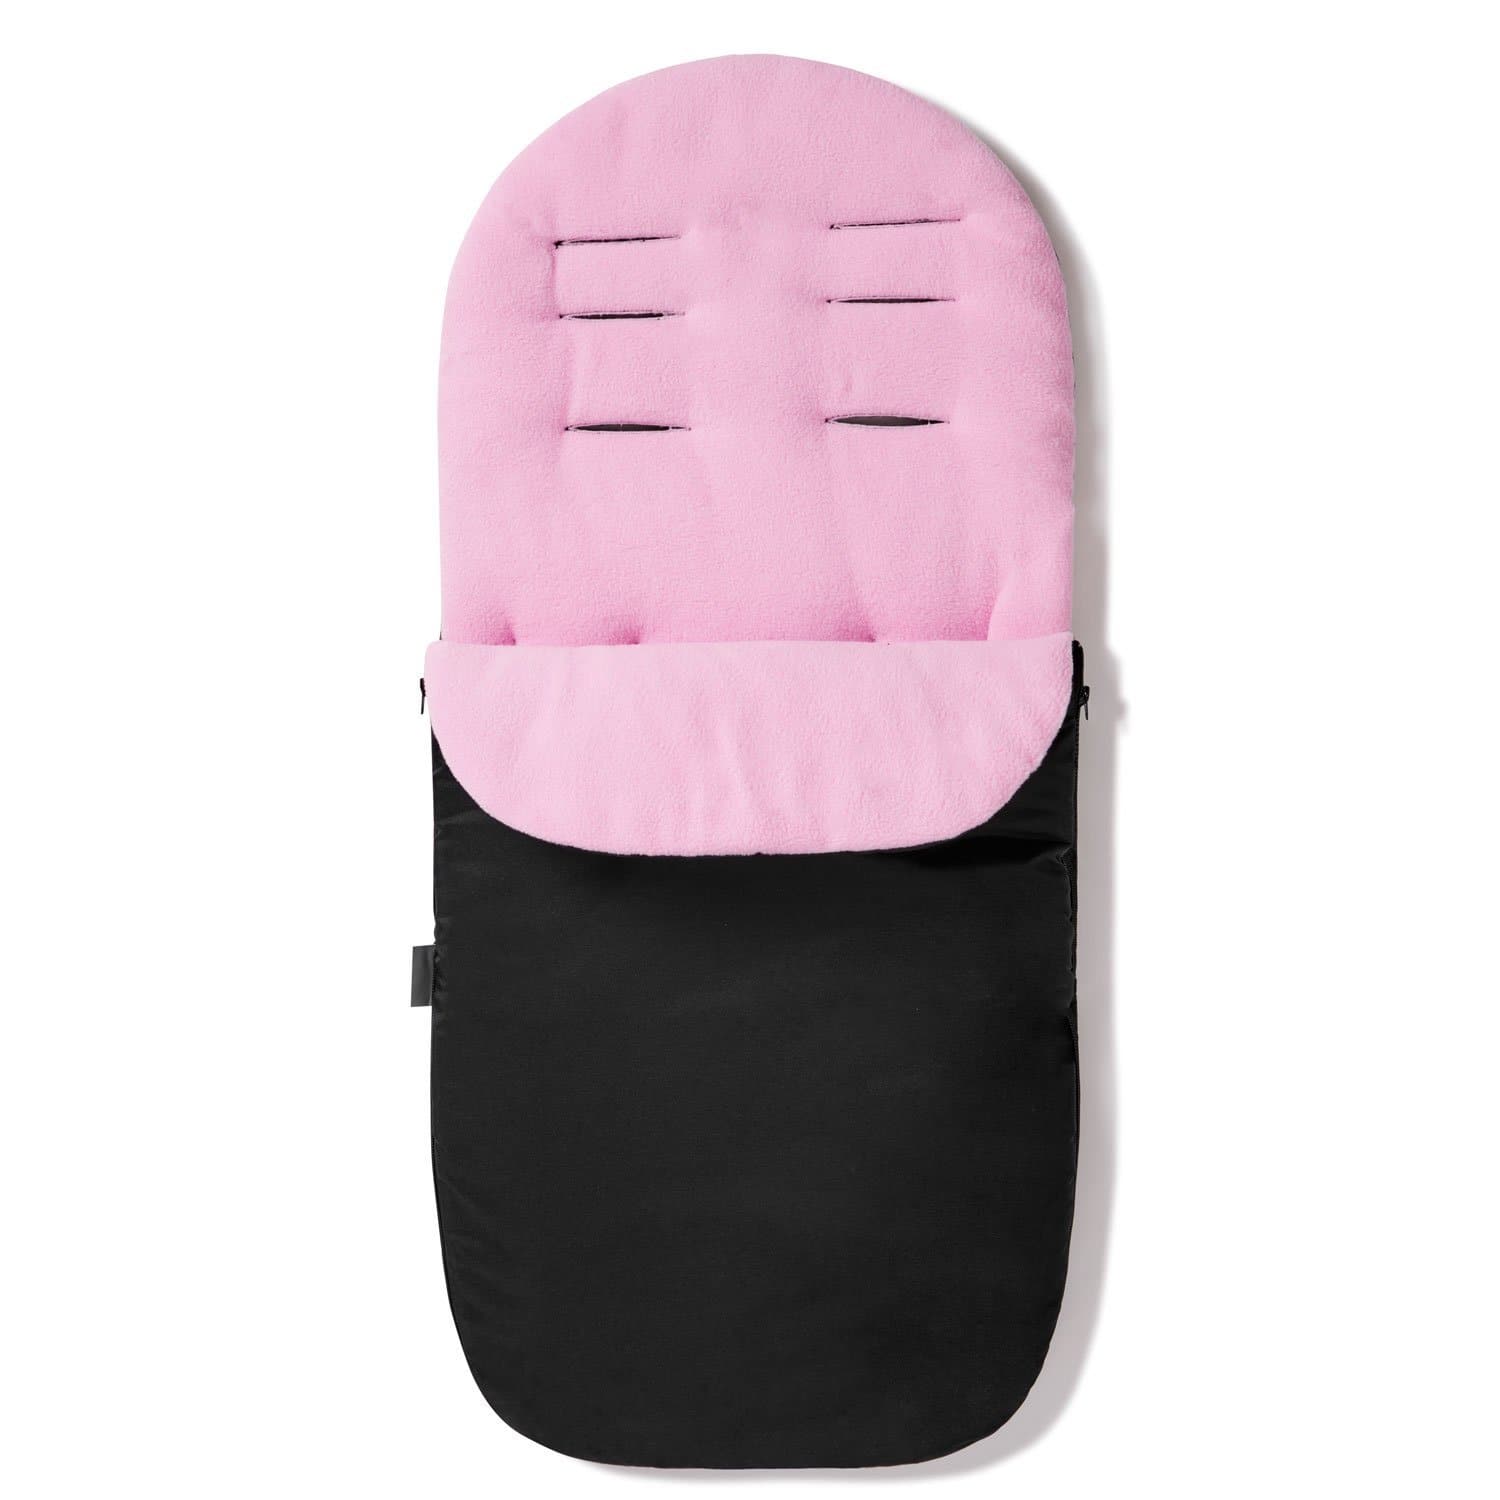 Footmuff / Cosy Toes Compatible with Zeta - Light Pink / Fits All Models | For Your Little One